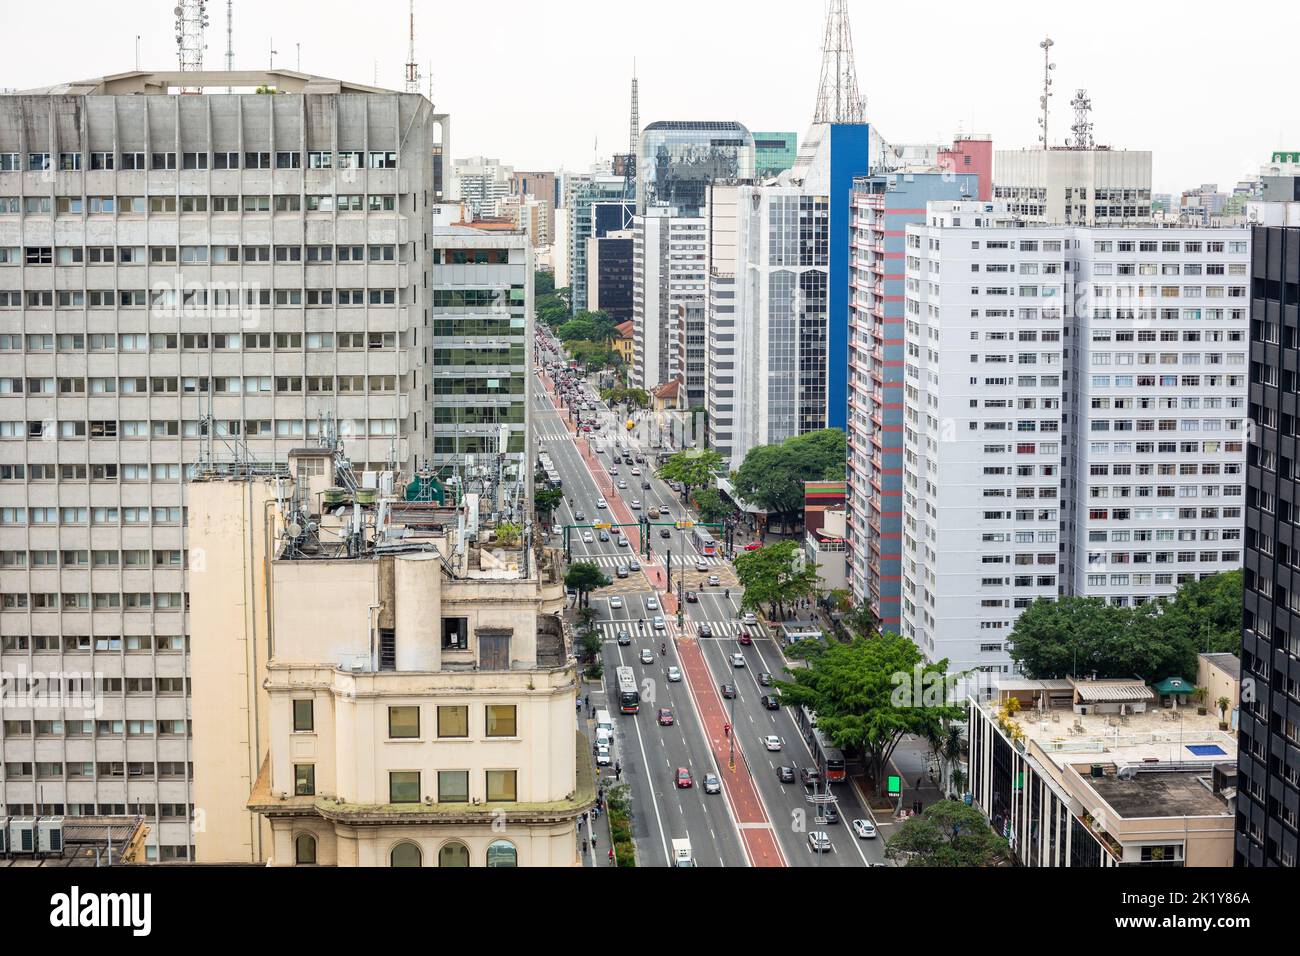 Beautiful aerial view of Paulista avenue, Sao Paulo city skyline. Street cityscape with modern buildings and car traffic. Brazil urban architecture. Stock Photo